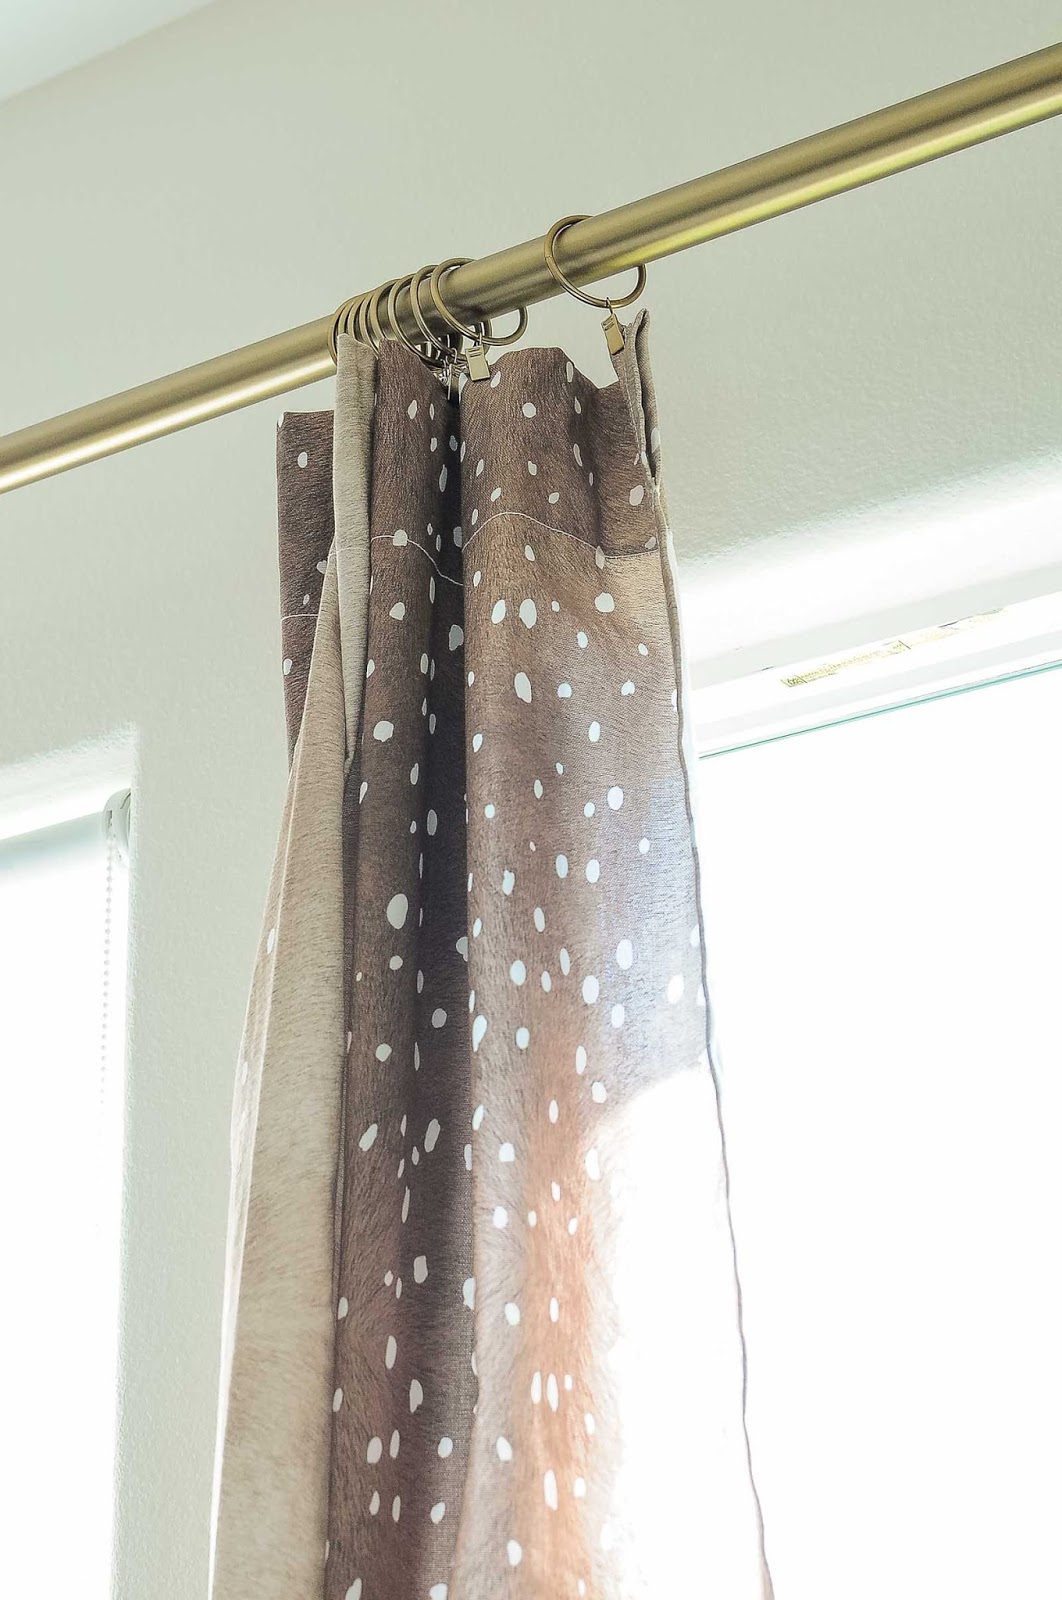 Fawn or antelope drapery/curtain panels look chic when hung from a warm gold brass curtain rod.